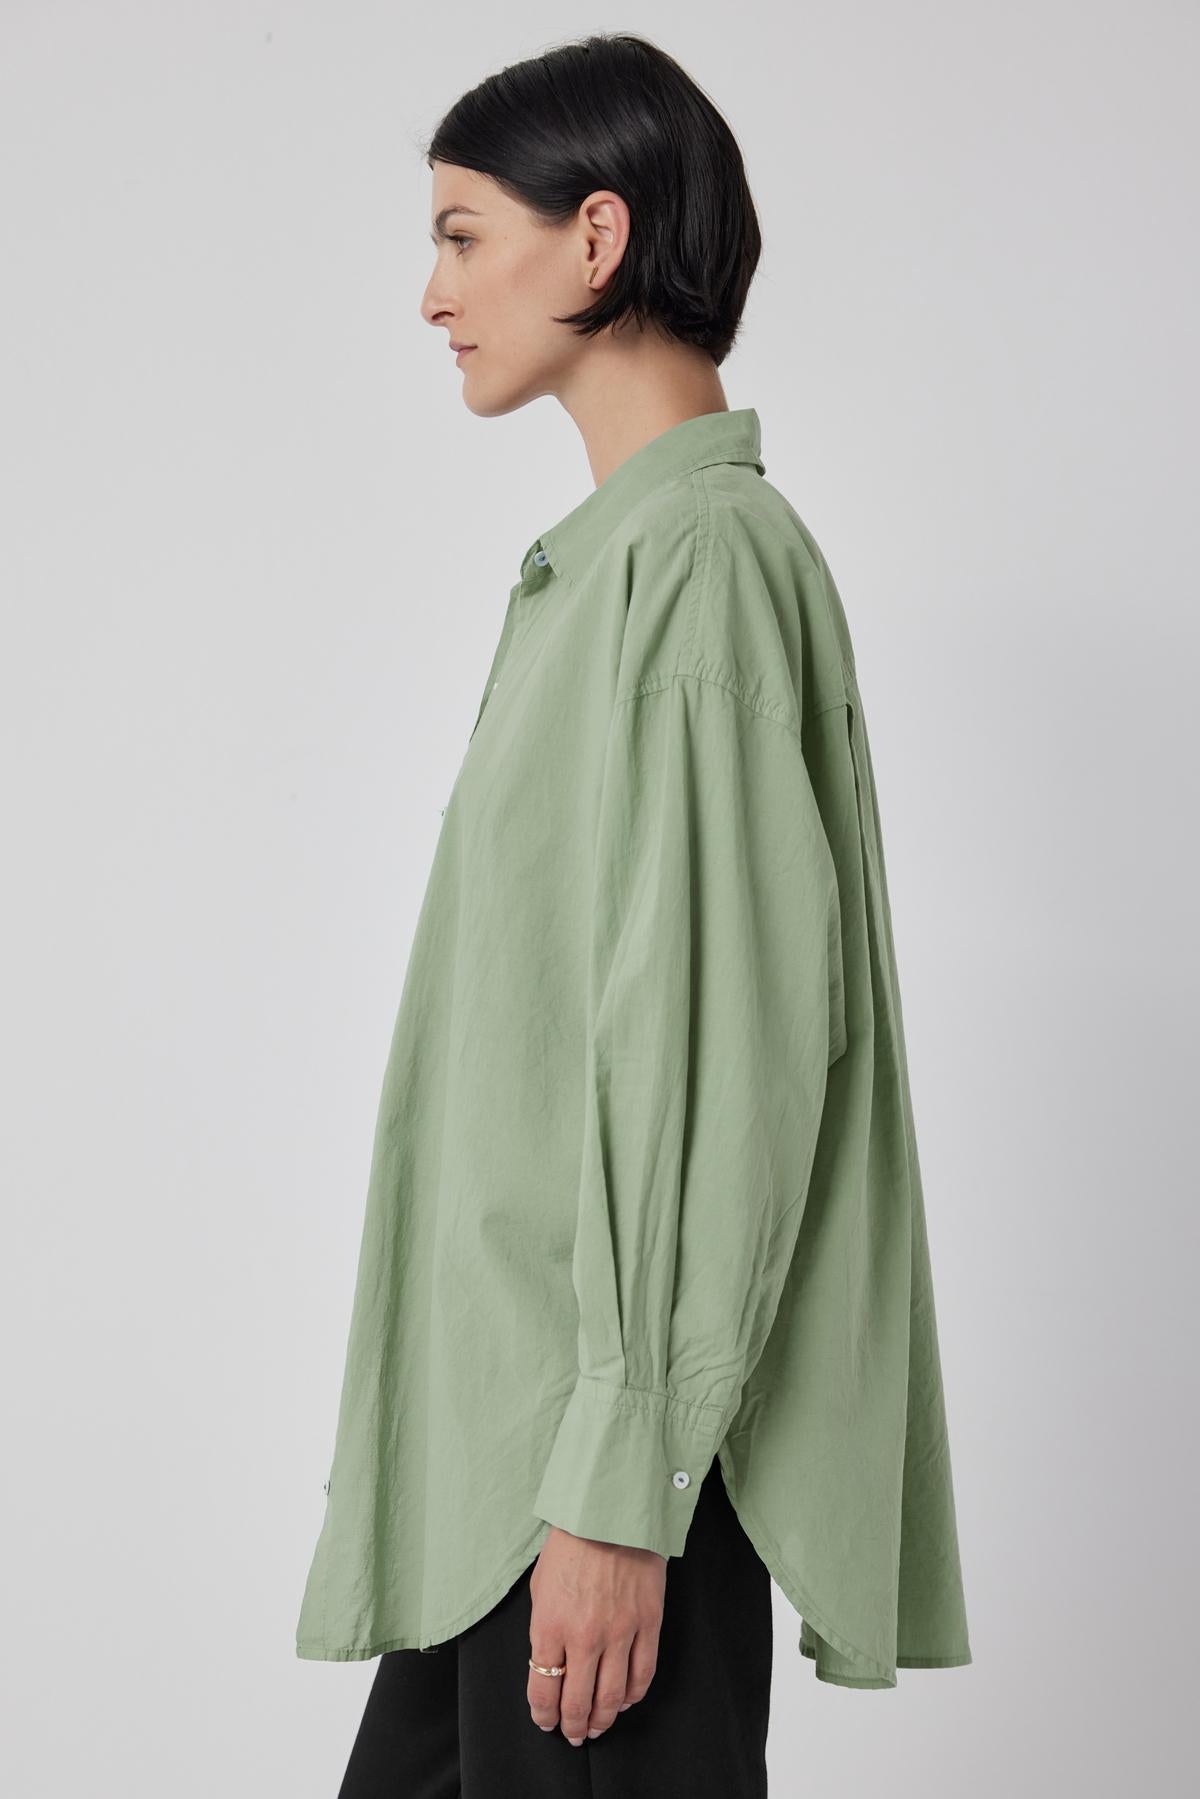 The oversized green Redondo Button-Up Shirt from Velvet by Jenny Graham worn by a woman.-36198180061377